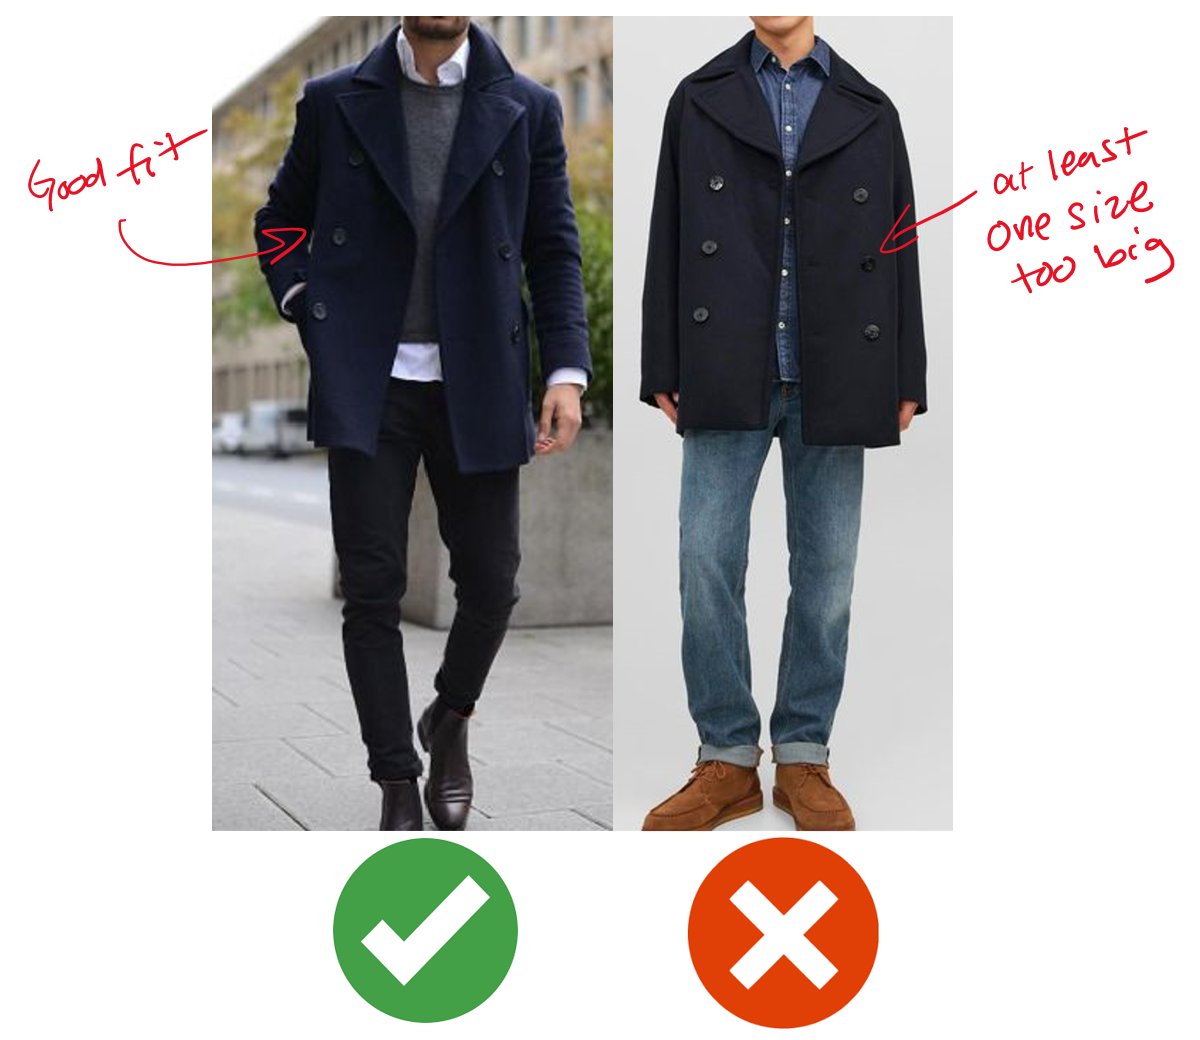 WellBuiltStyle on X: When your pea coat is worn unbuttoned it